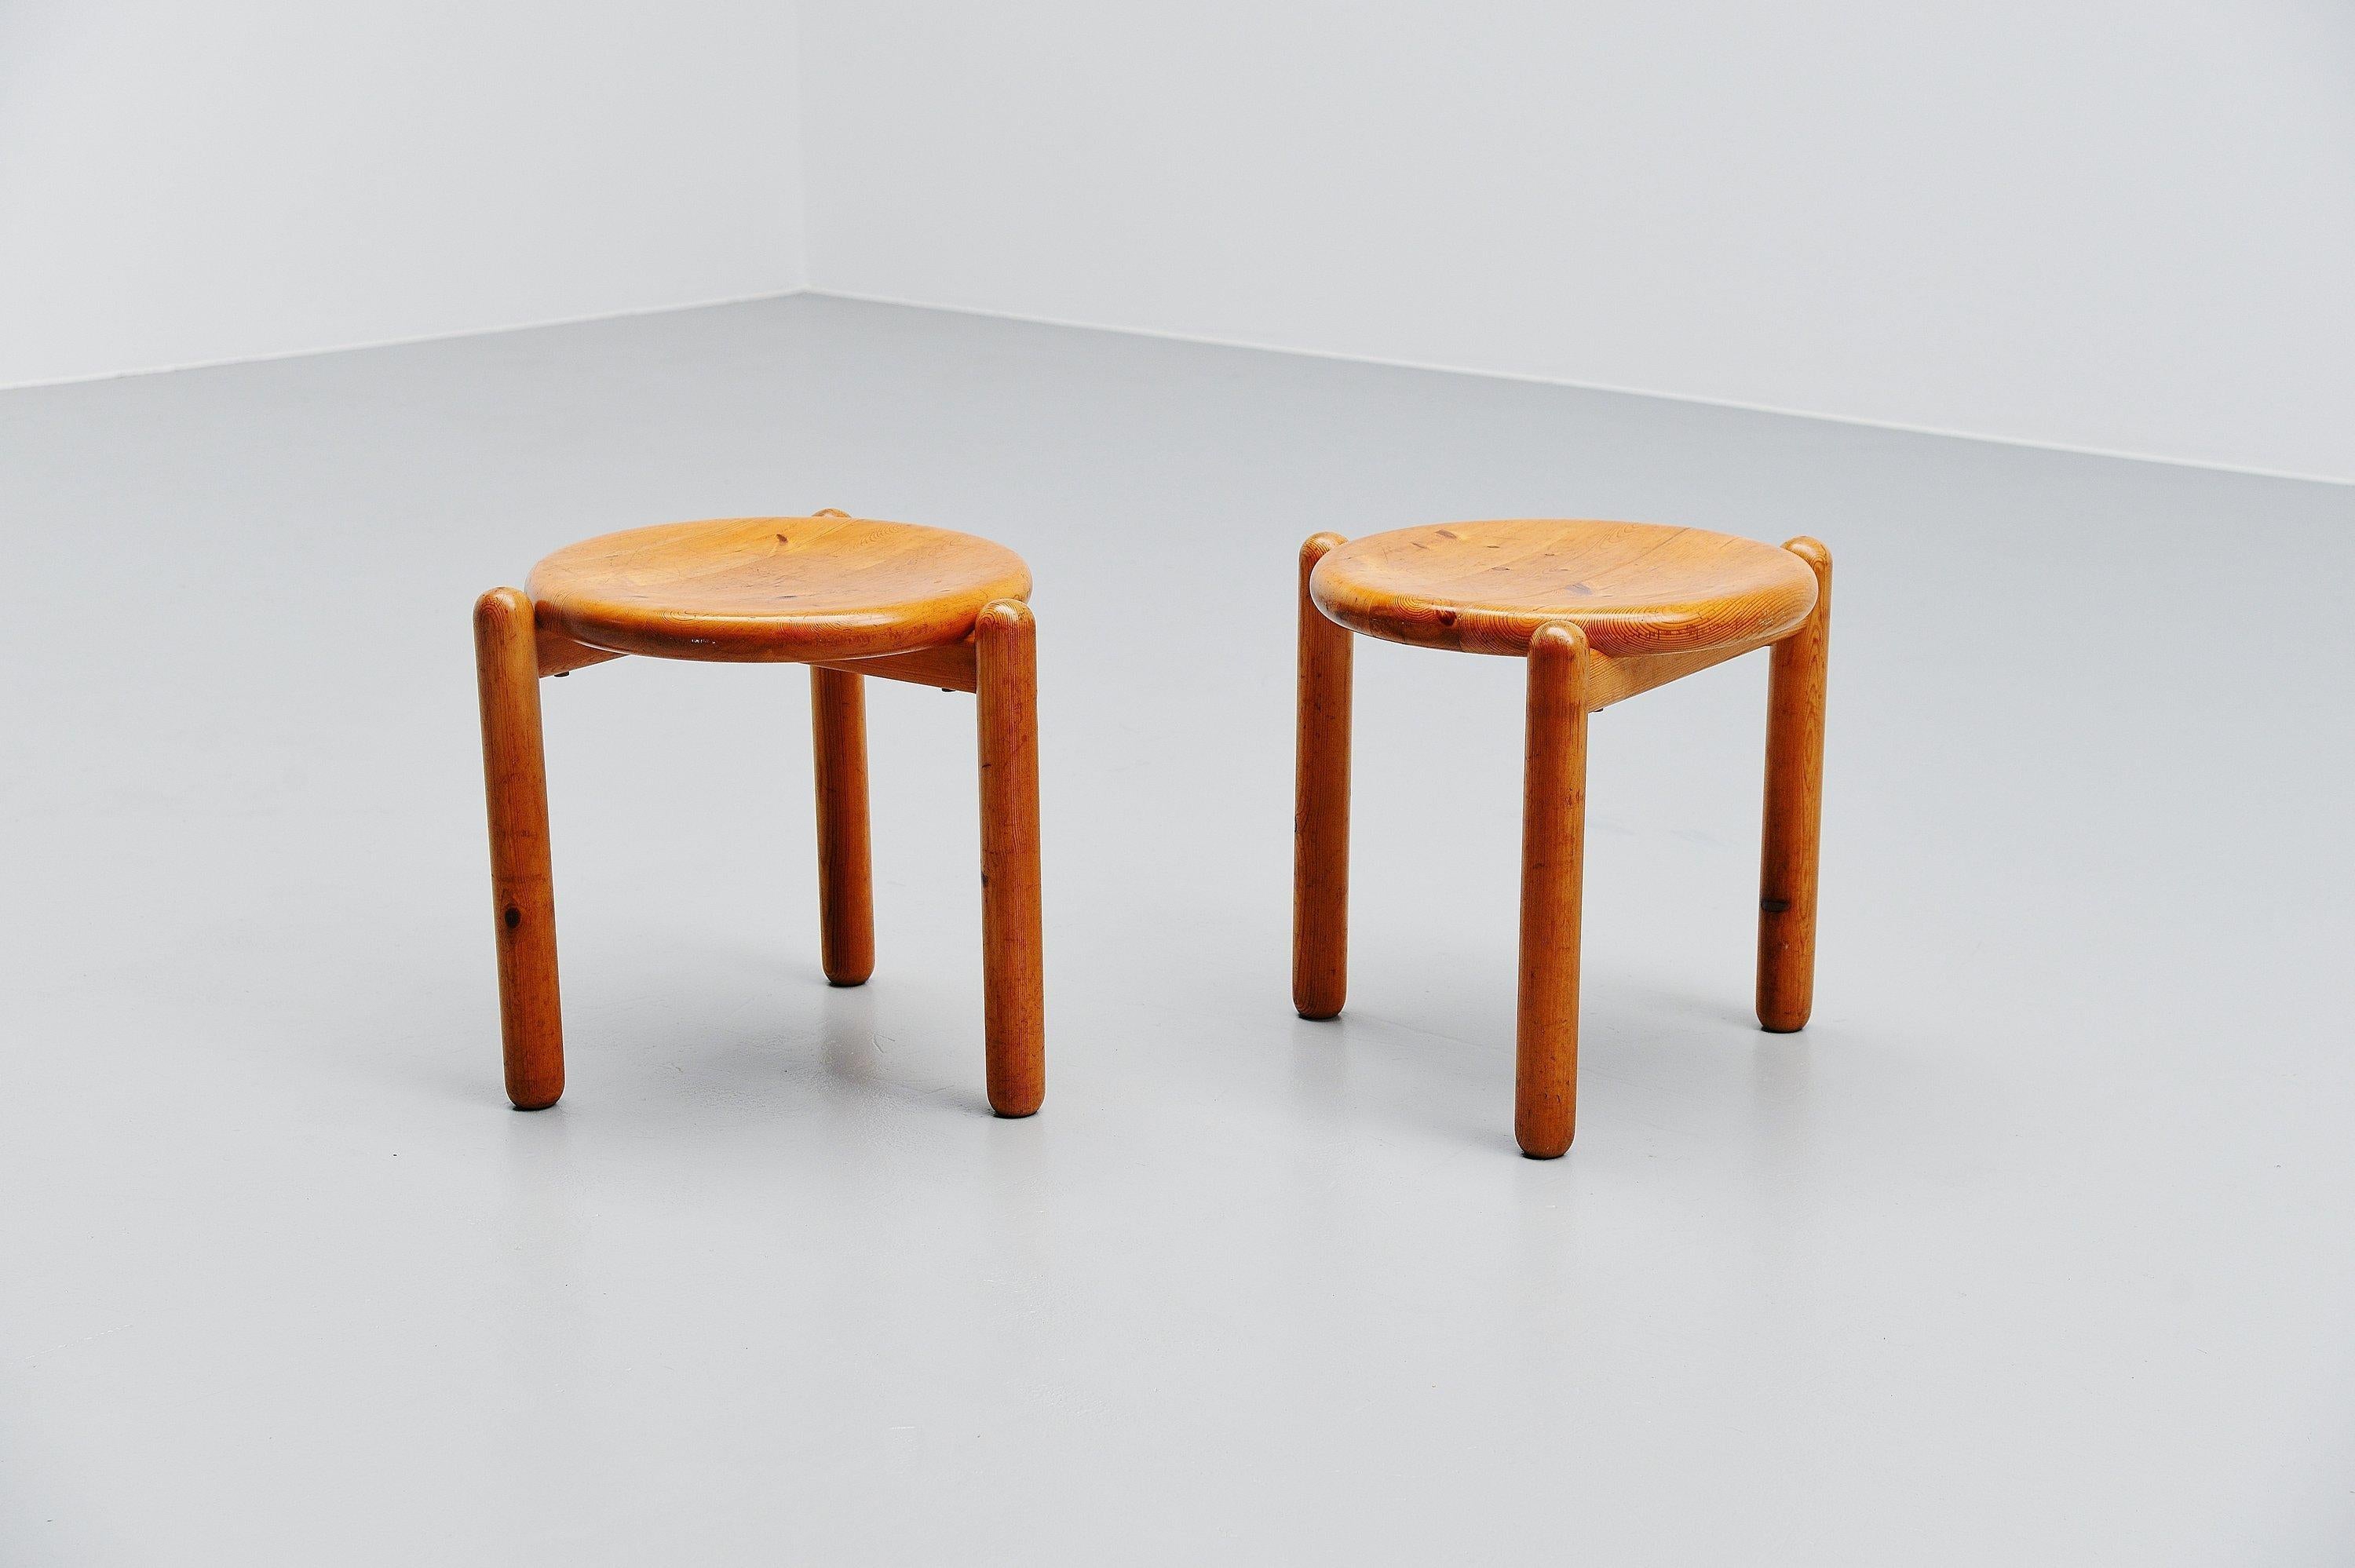 Nice set of 2 stackable stools designed by Rainer Daumiller and manufactured by Hirtshals Sawmill, Denmark 1970. These stools are designed by this Danish architect, you can tell right away. The structural details on these stools and the possibillity